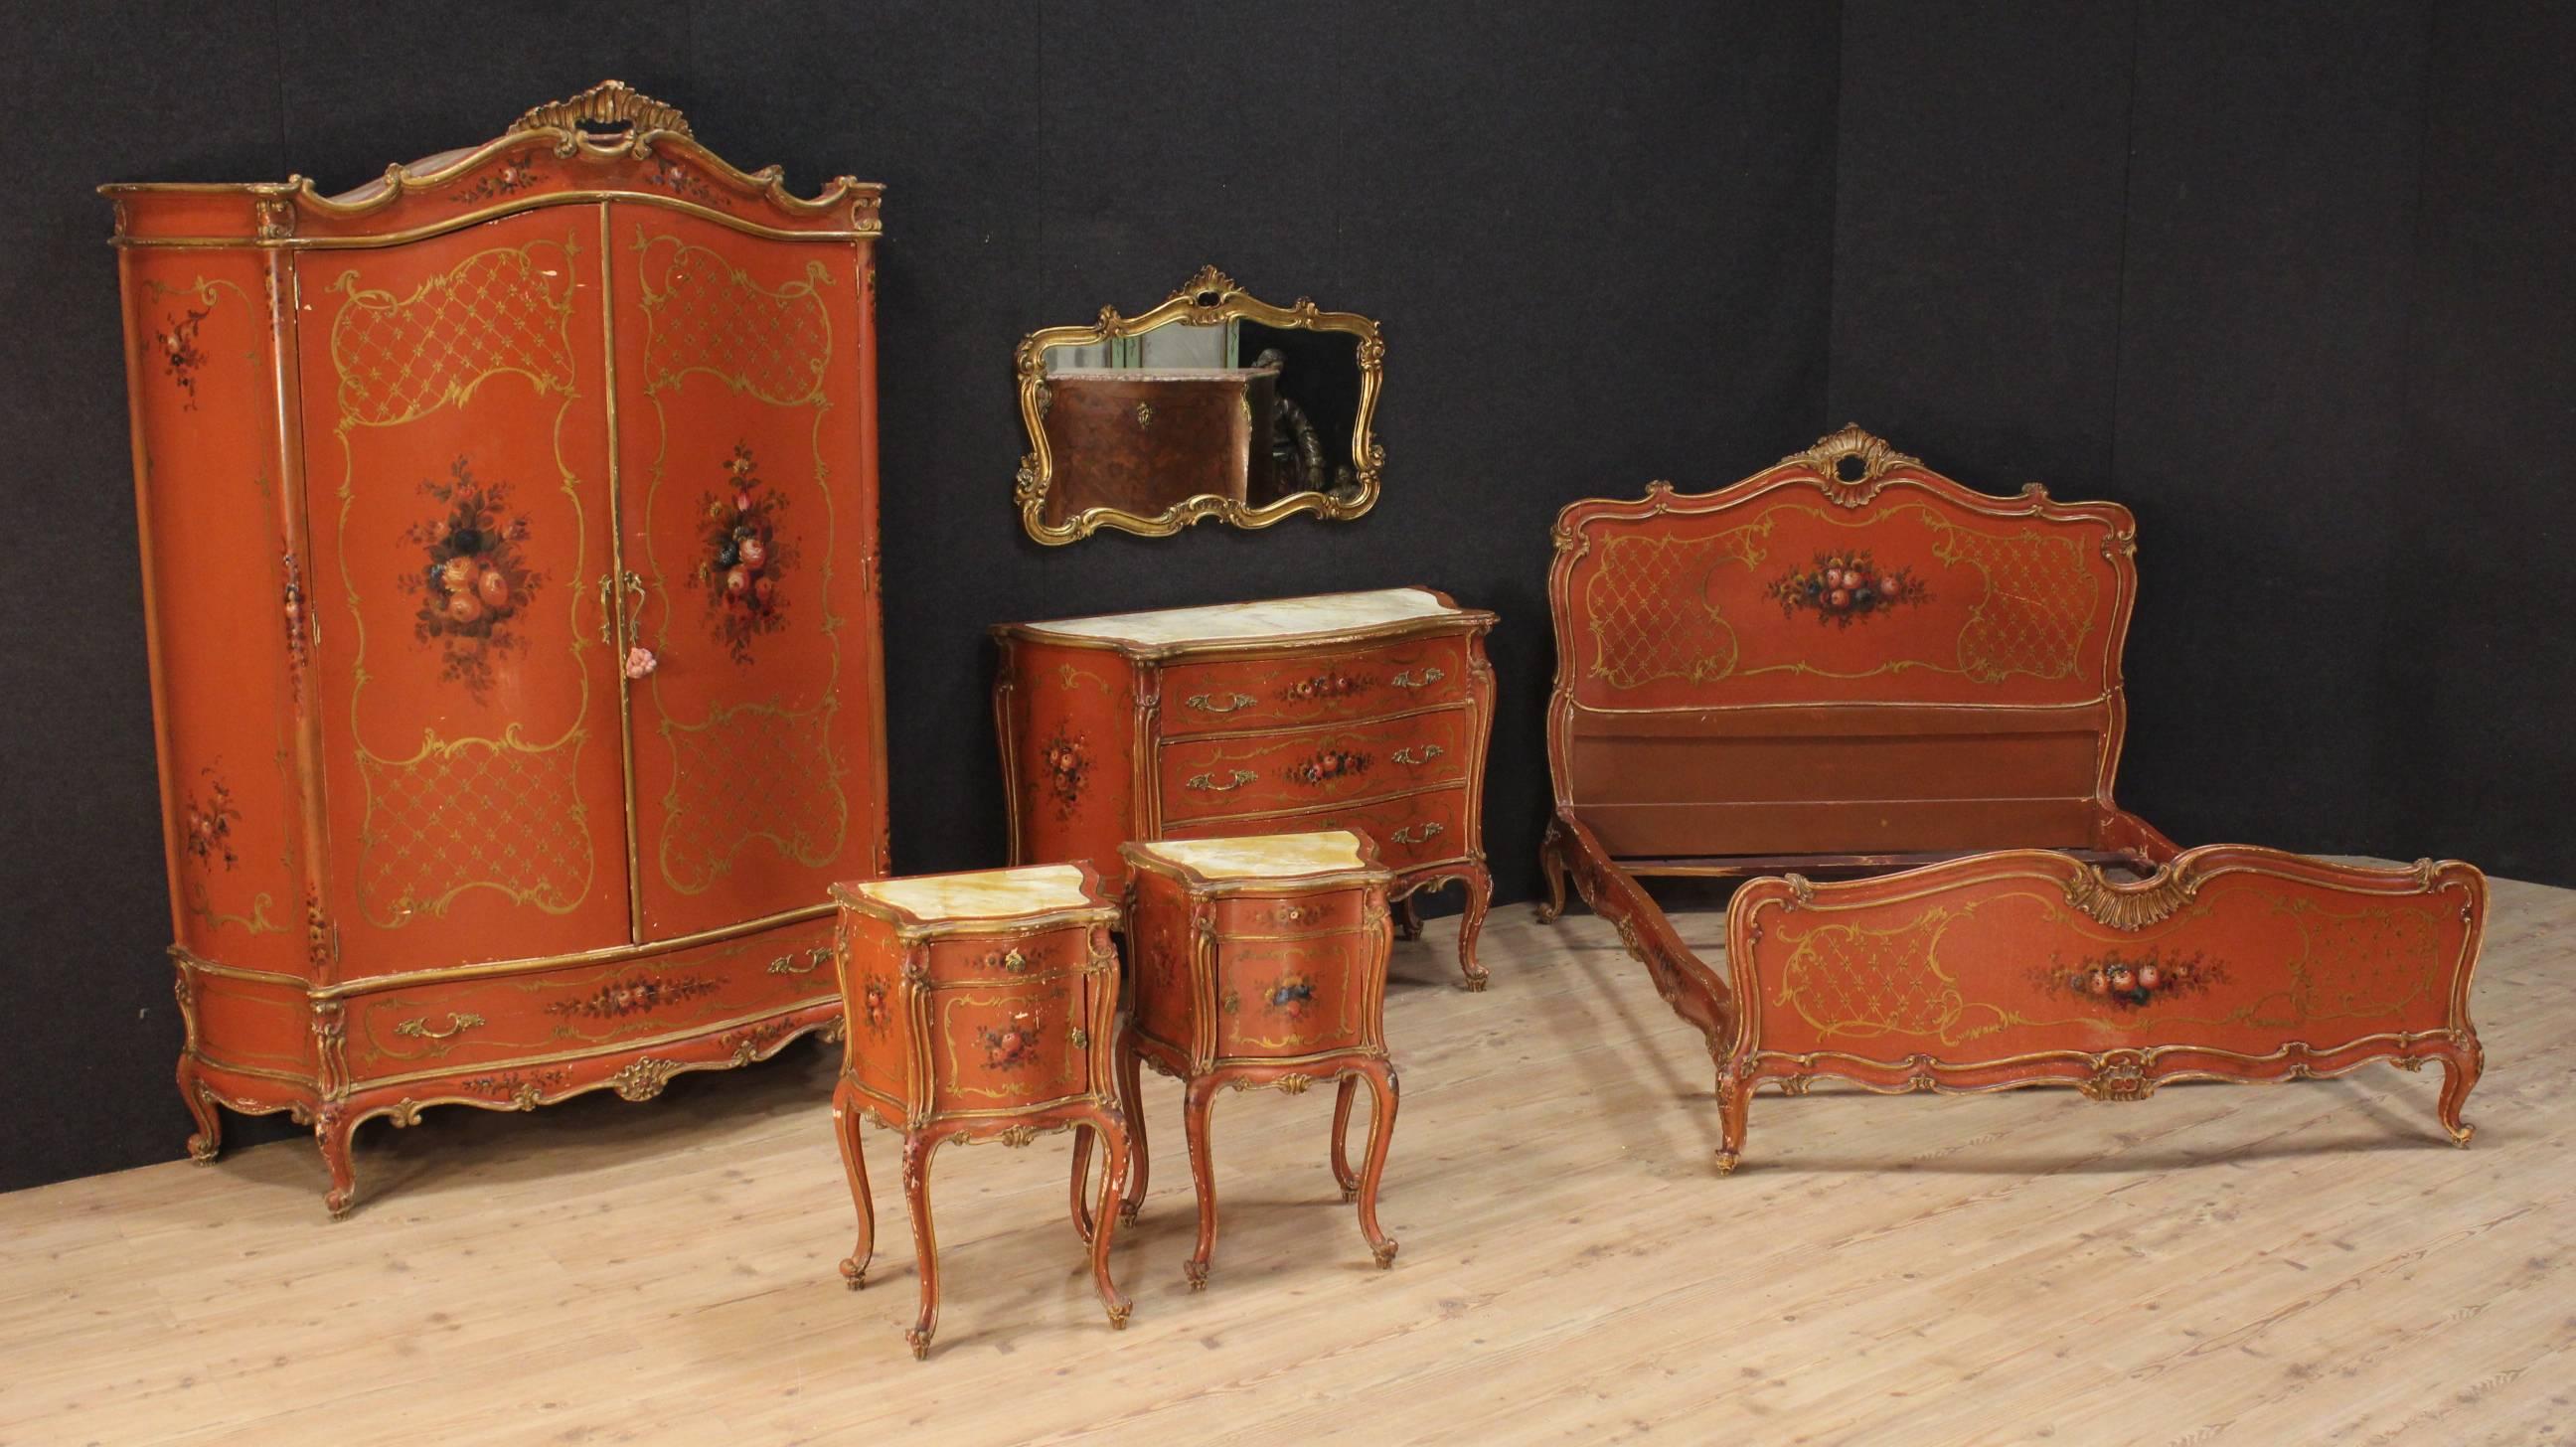 Venetian double bed of the 20th century. Furniture made by richly lacquered, gilded and painted with floral motifs wood of great taste and enjoyment. Bed of fabulous decoration for Venetian lacquered furniture lovers. Wooden structure of excellent